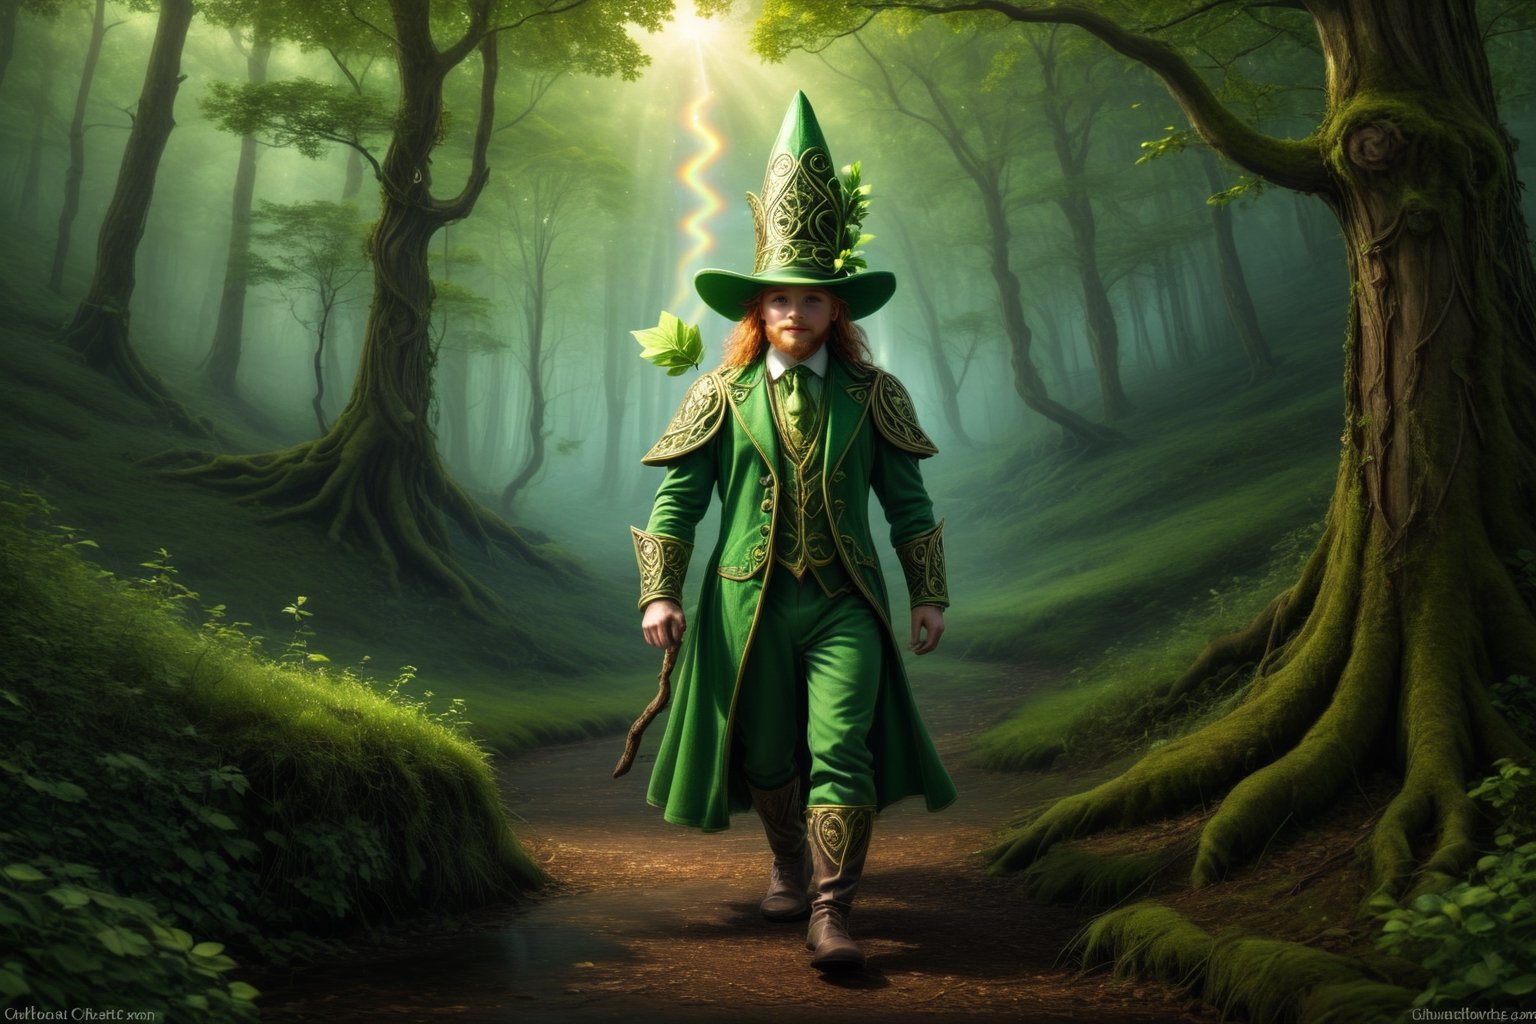 (((Leprechaun, Irish leprechaun, forest spirit, humanoid, small man, green suit, green top hat)))
Imagine a mystical and enchanted landscape where emerald green and gold colors intertwine in a dance of light and shadow. In the center of the scene, an ancient forest emerges, its trees seem to whisper ancient secrets while the leaves dance to the rhythm of the wind. High in the sky, a resplendent rainbow curves majestically, revealing a legendary treasure that awaits those with brave hearts. In the clearing of this magical forest, an enigmatic figure appears: a leprechaun, guardian of fortune and bearer of the Celtic essence. The fae's gaze shines with ancient wisdom, inviting viewers to enter a realm of wonder and adventure. What hidden secrets and lost treasures await in this dream world inspired by the magic of St. Patrick and rich Celtic tradition?